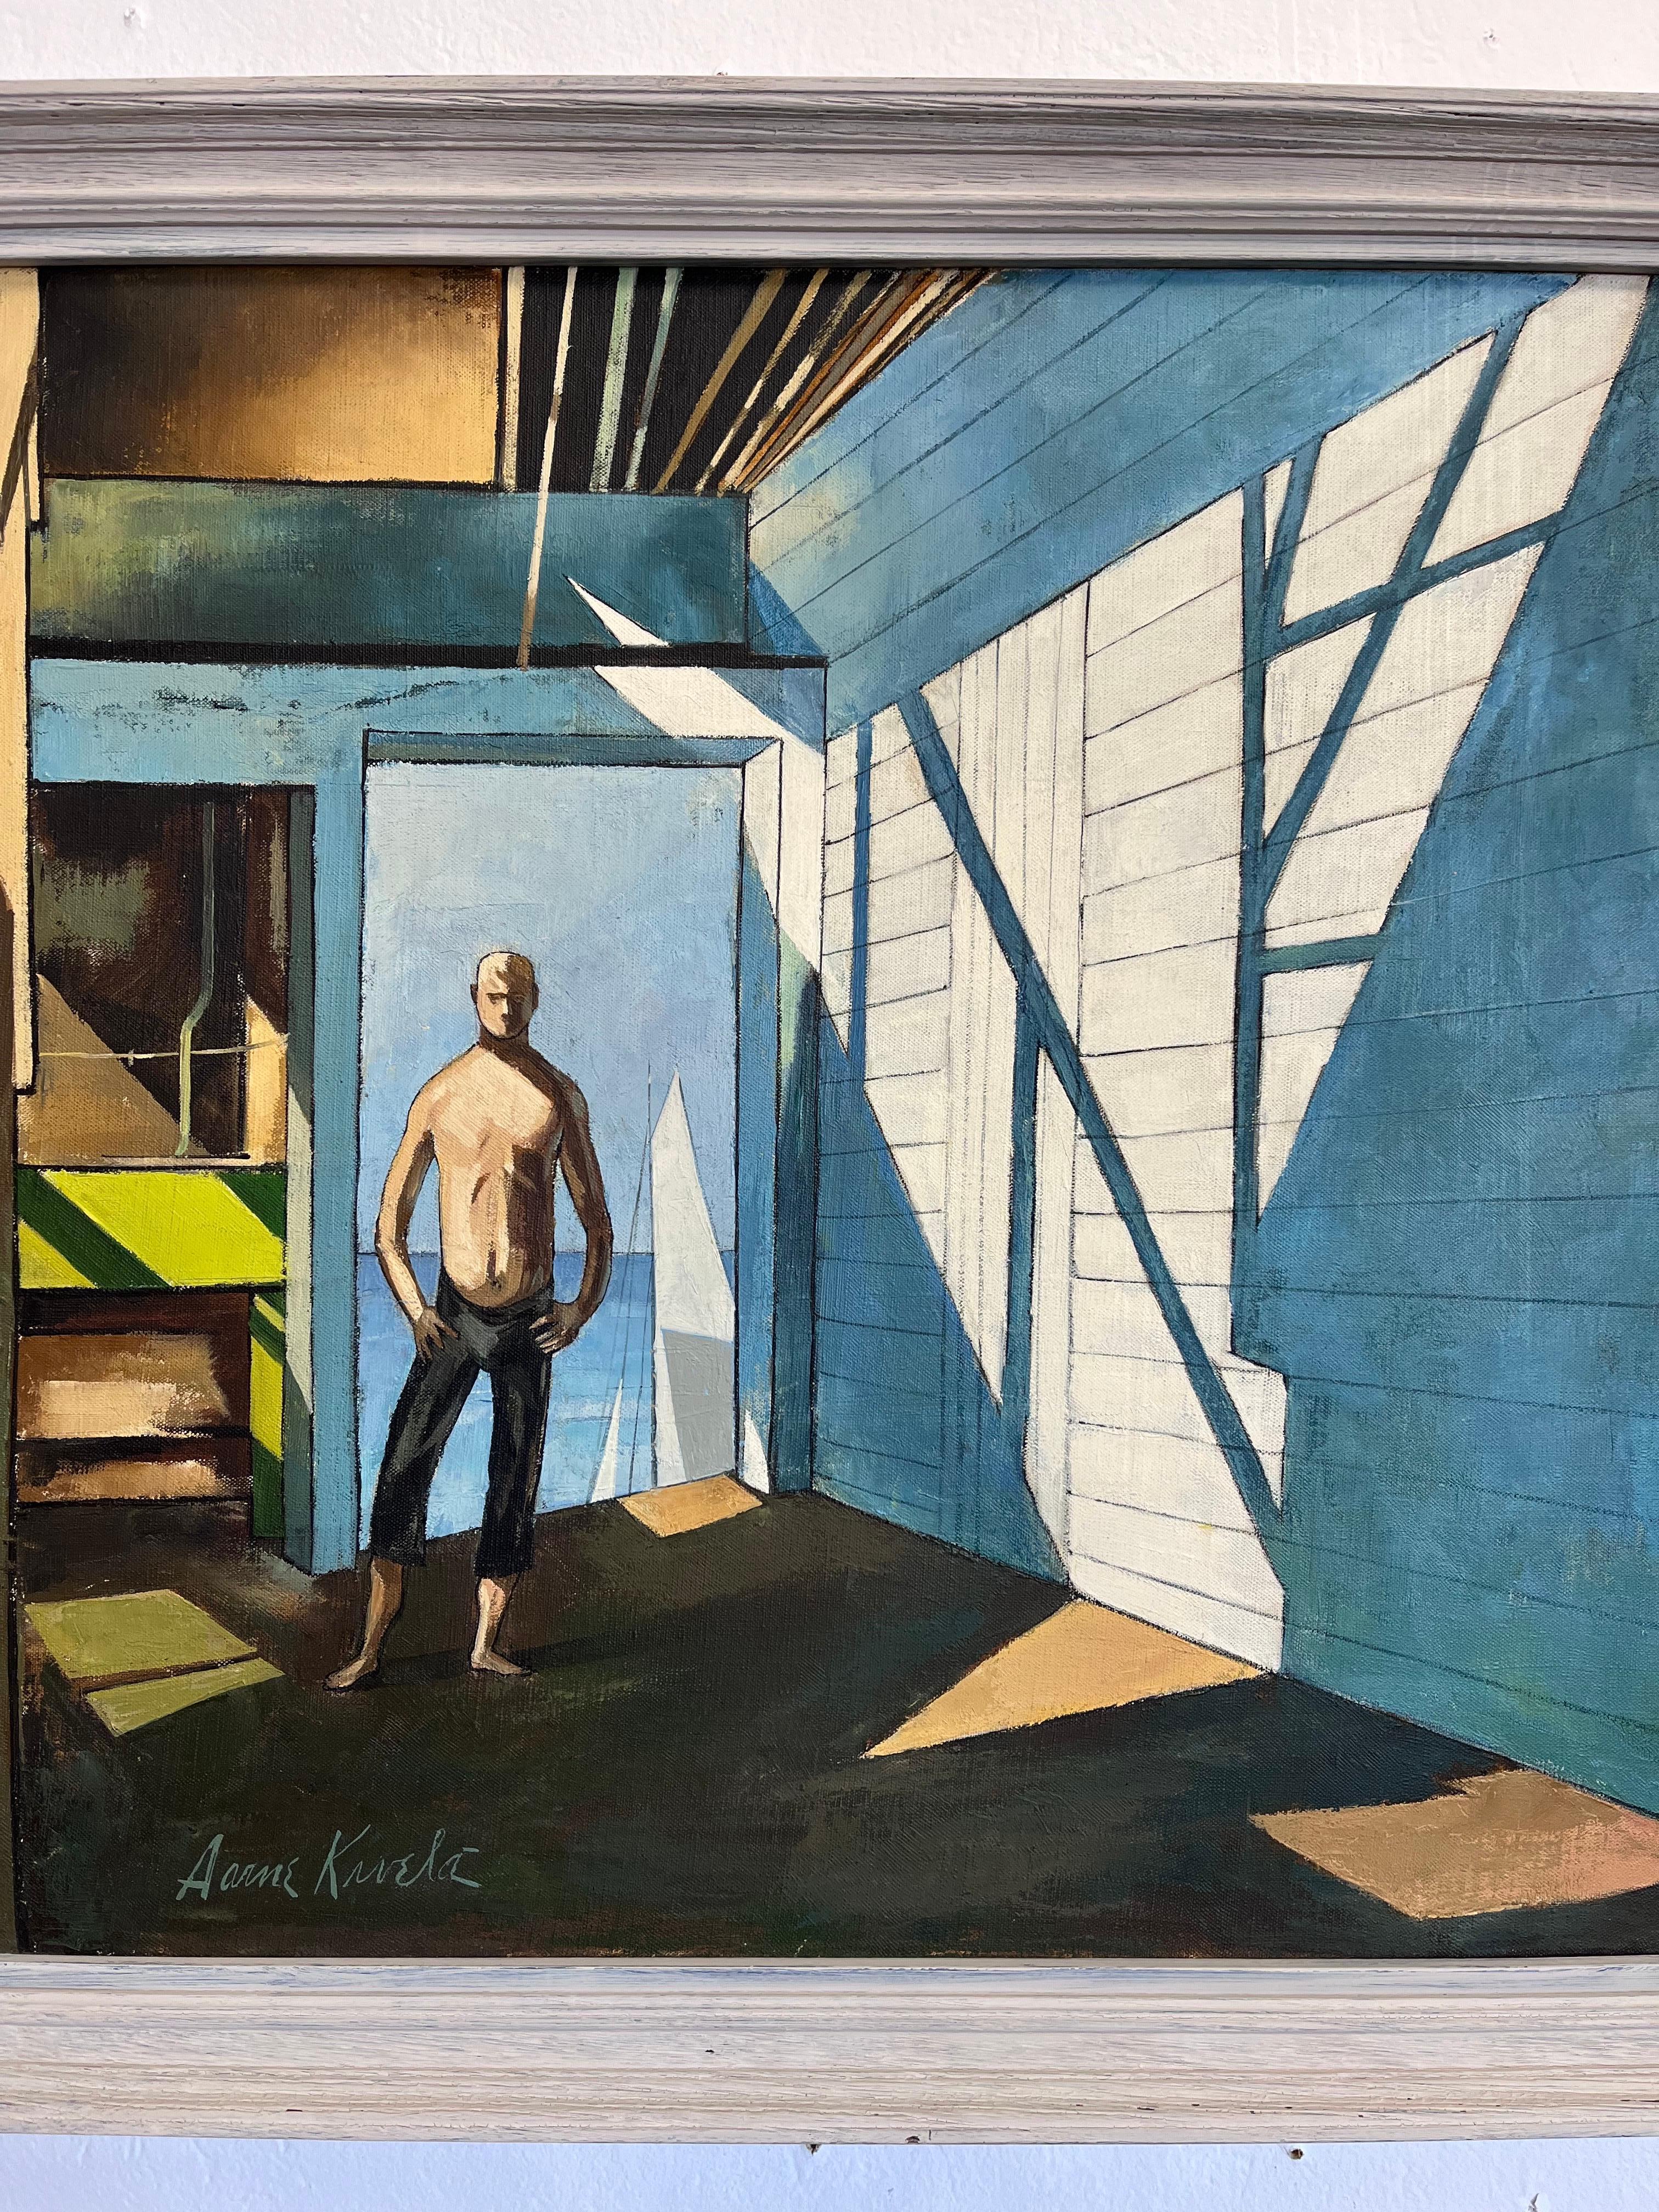 An impressive precisionist style abstract painting of a half nude male figure in an interior. Calls to mind the works of Charles Sheeler as well as Charles Demuth. With a clear, bold palette, the artist skillfully invites the viewer into the